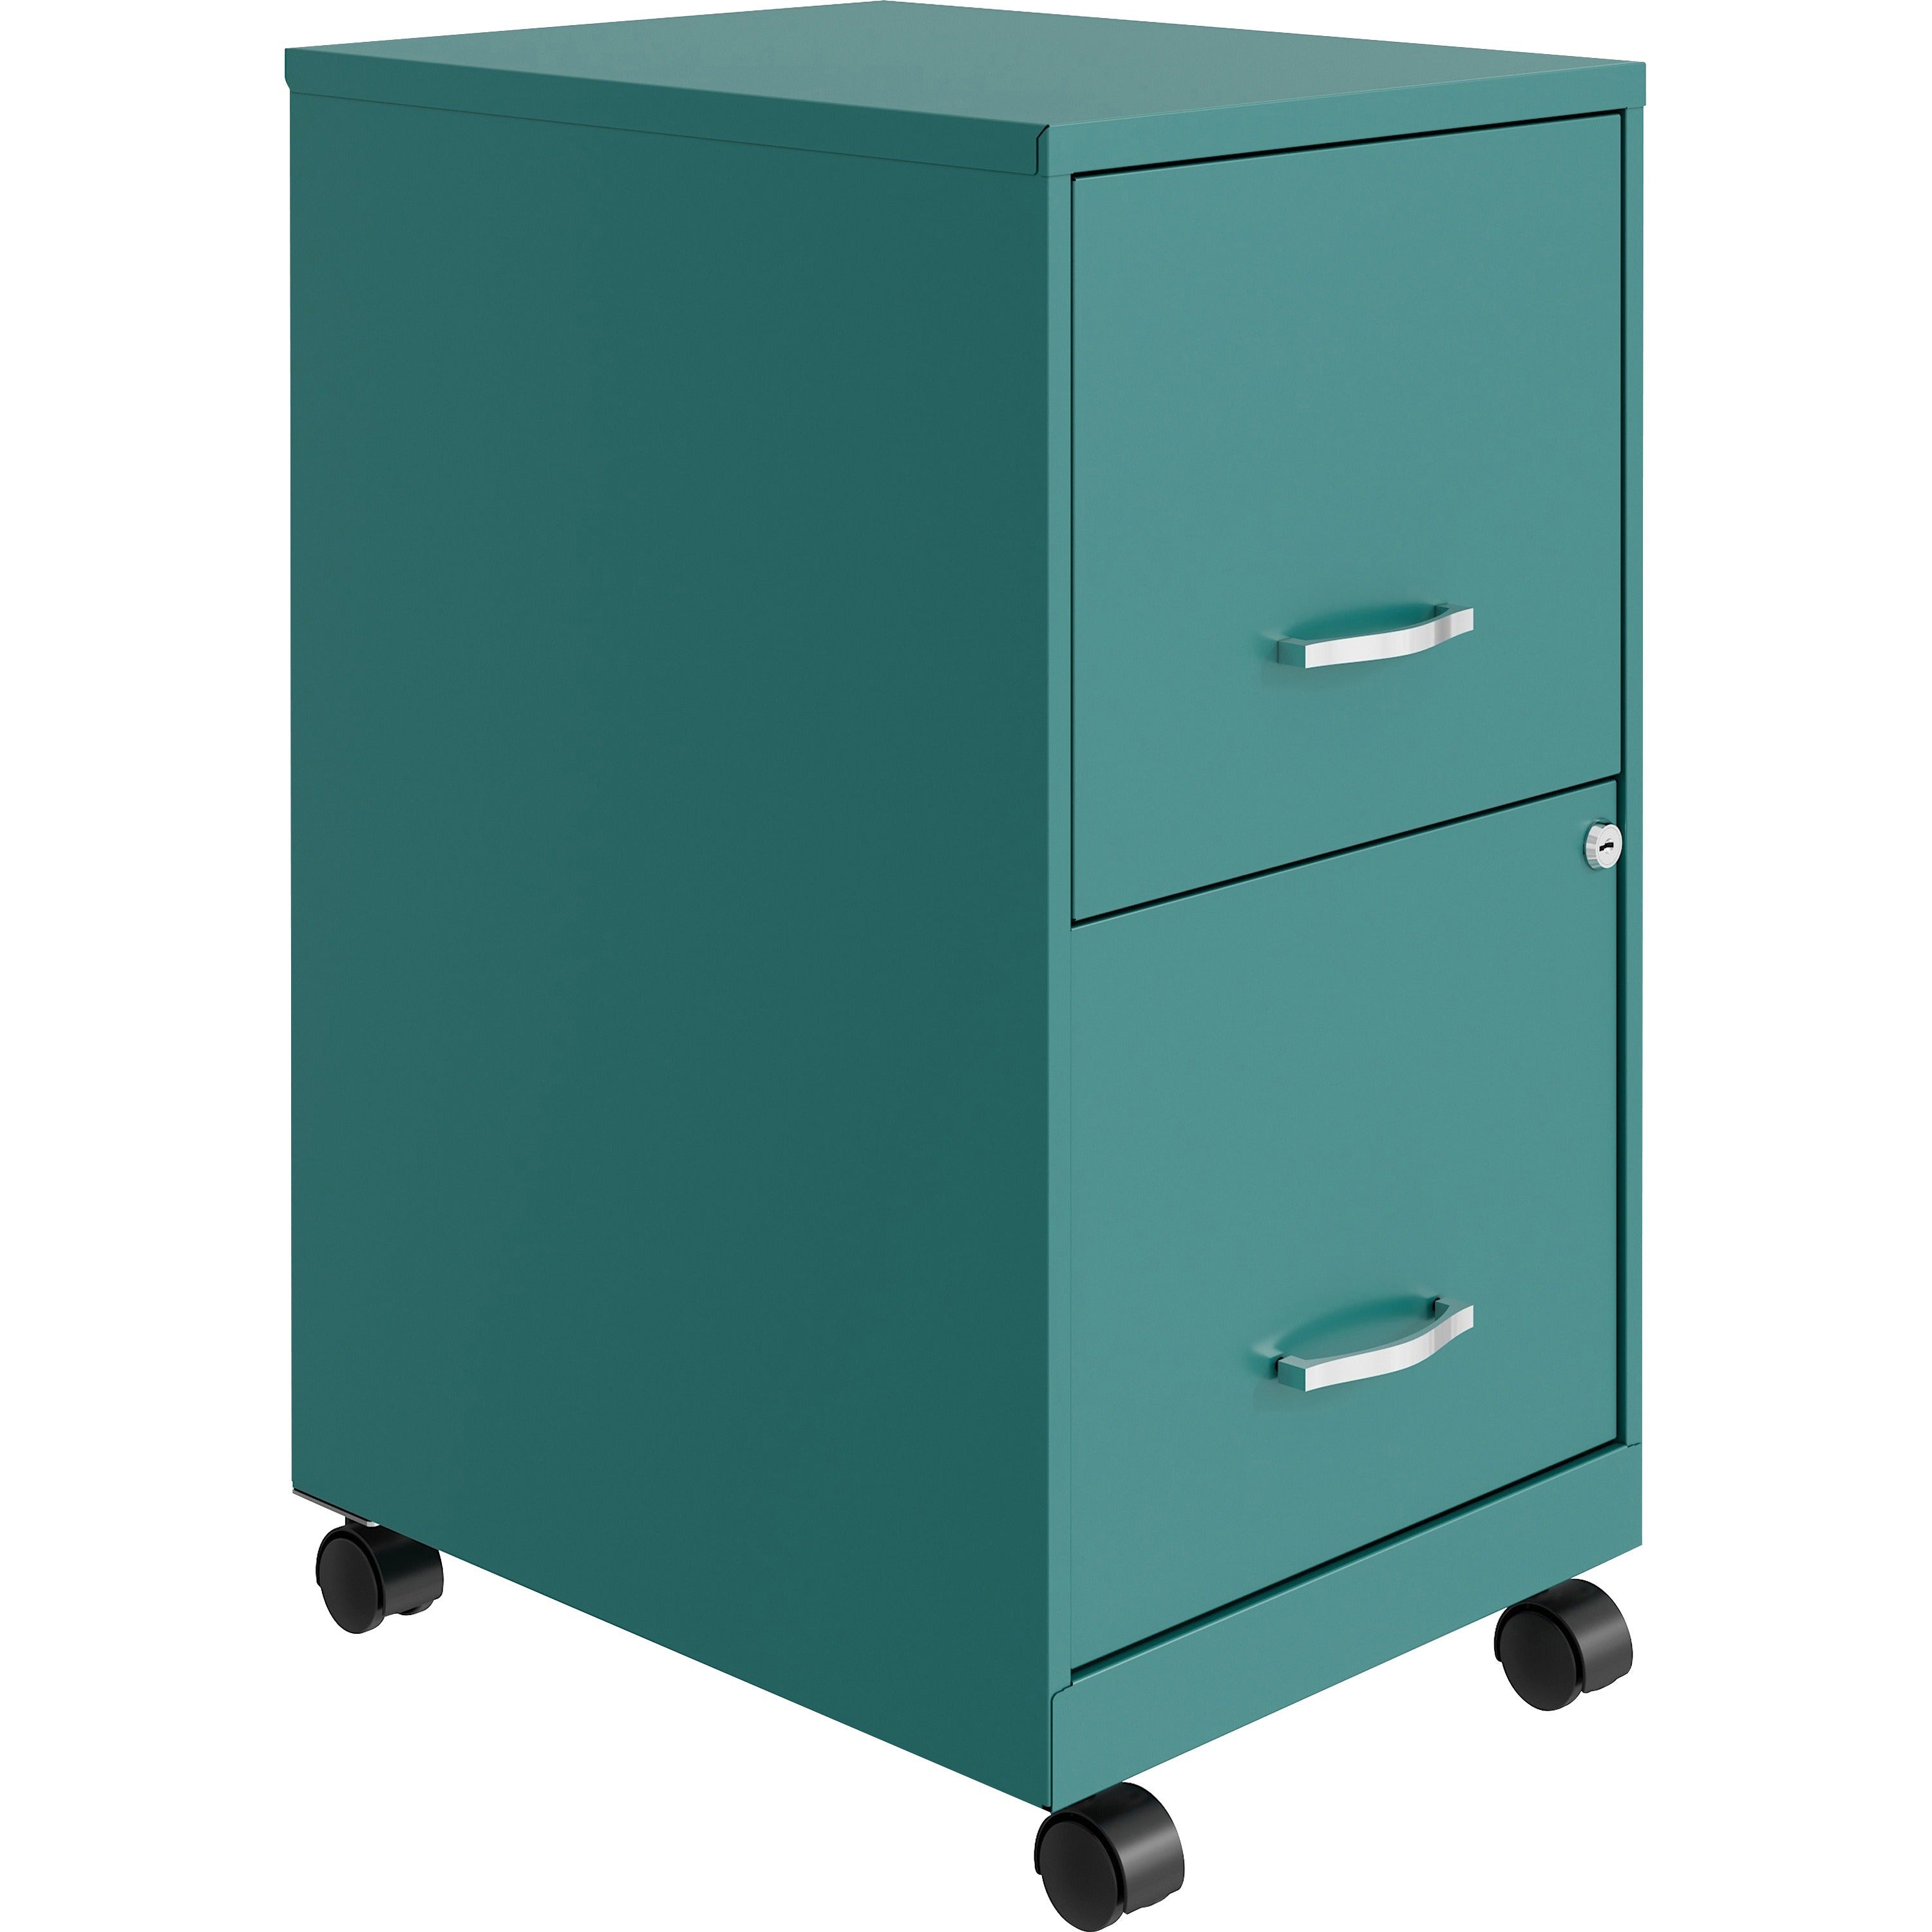 nusparc-mobile-file-cabinet-142-x-18-x-265-for-file-letter-mobility-locking-drawer-glide-suspension-3-4-drawer-extension-cam-lock-nonporous-surface-teal-painted-steel-steel-recycled_nprvf218amtl - 1